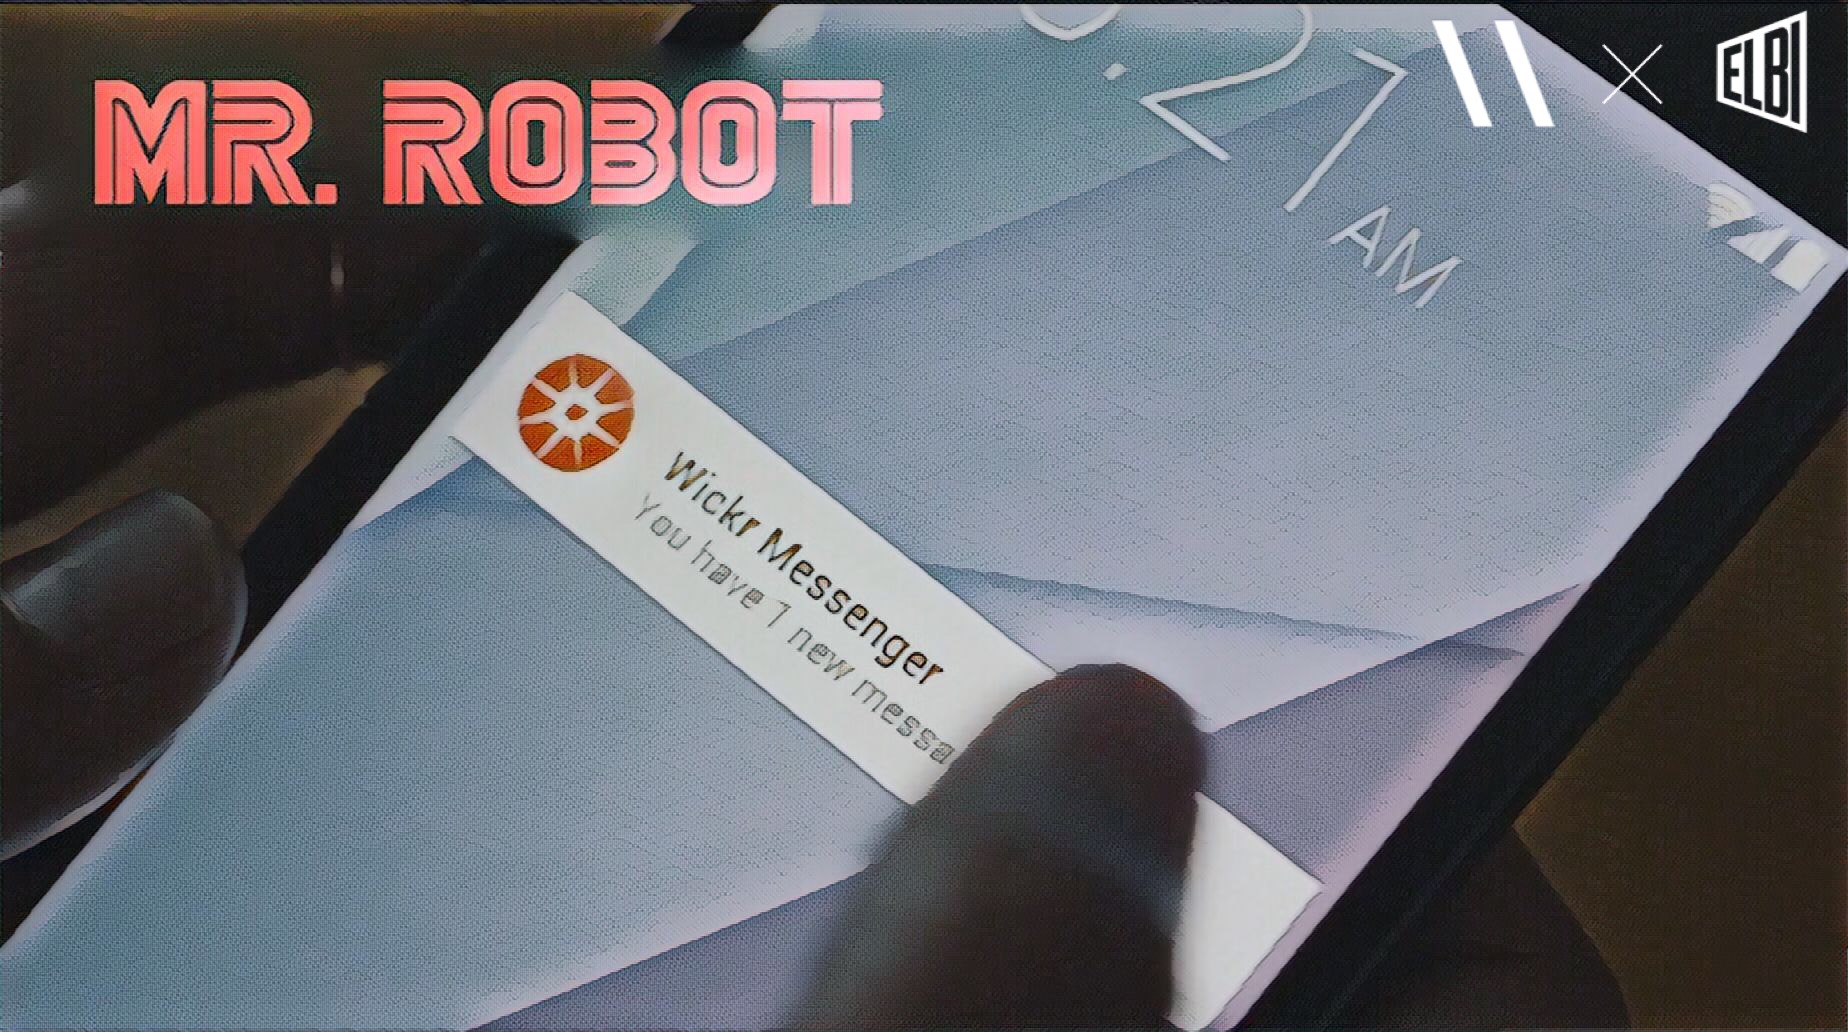 Wickr appeared on Mr. Robot